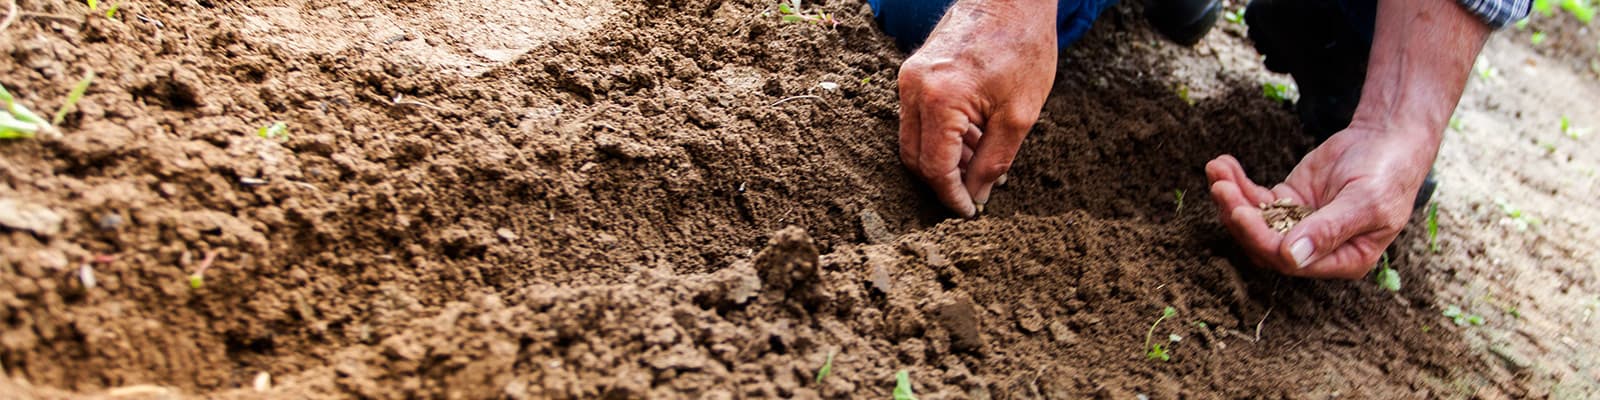 Seeds are planted into soil by hand